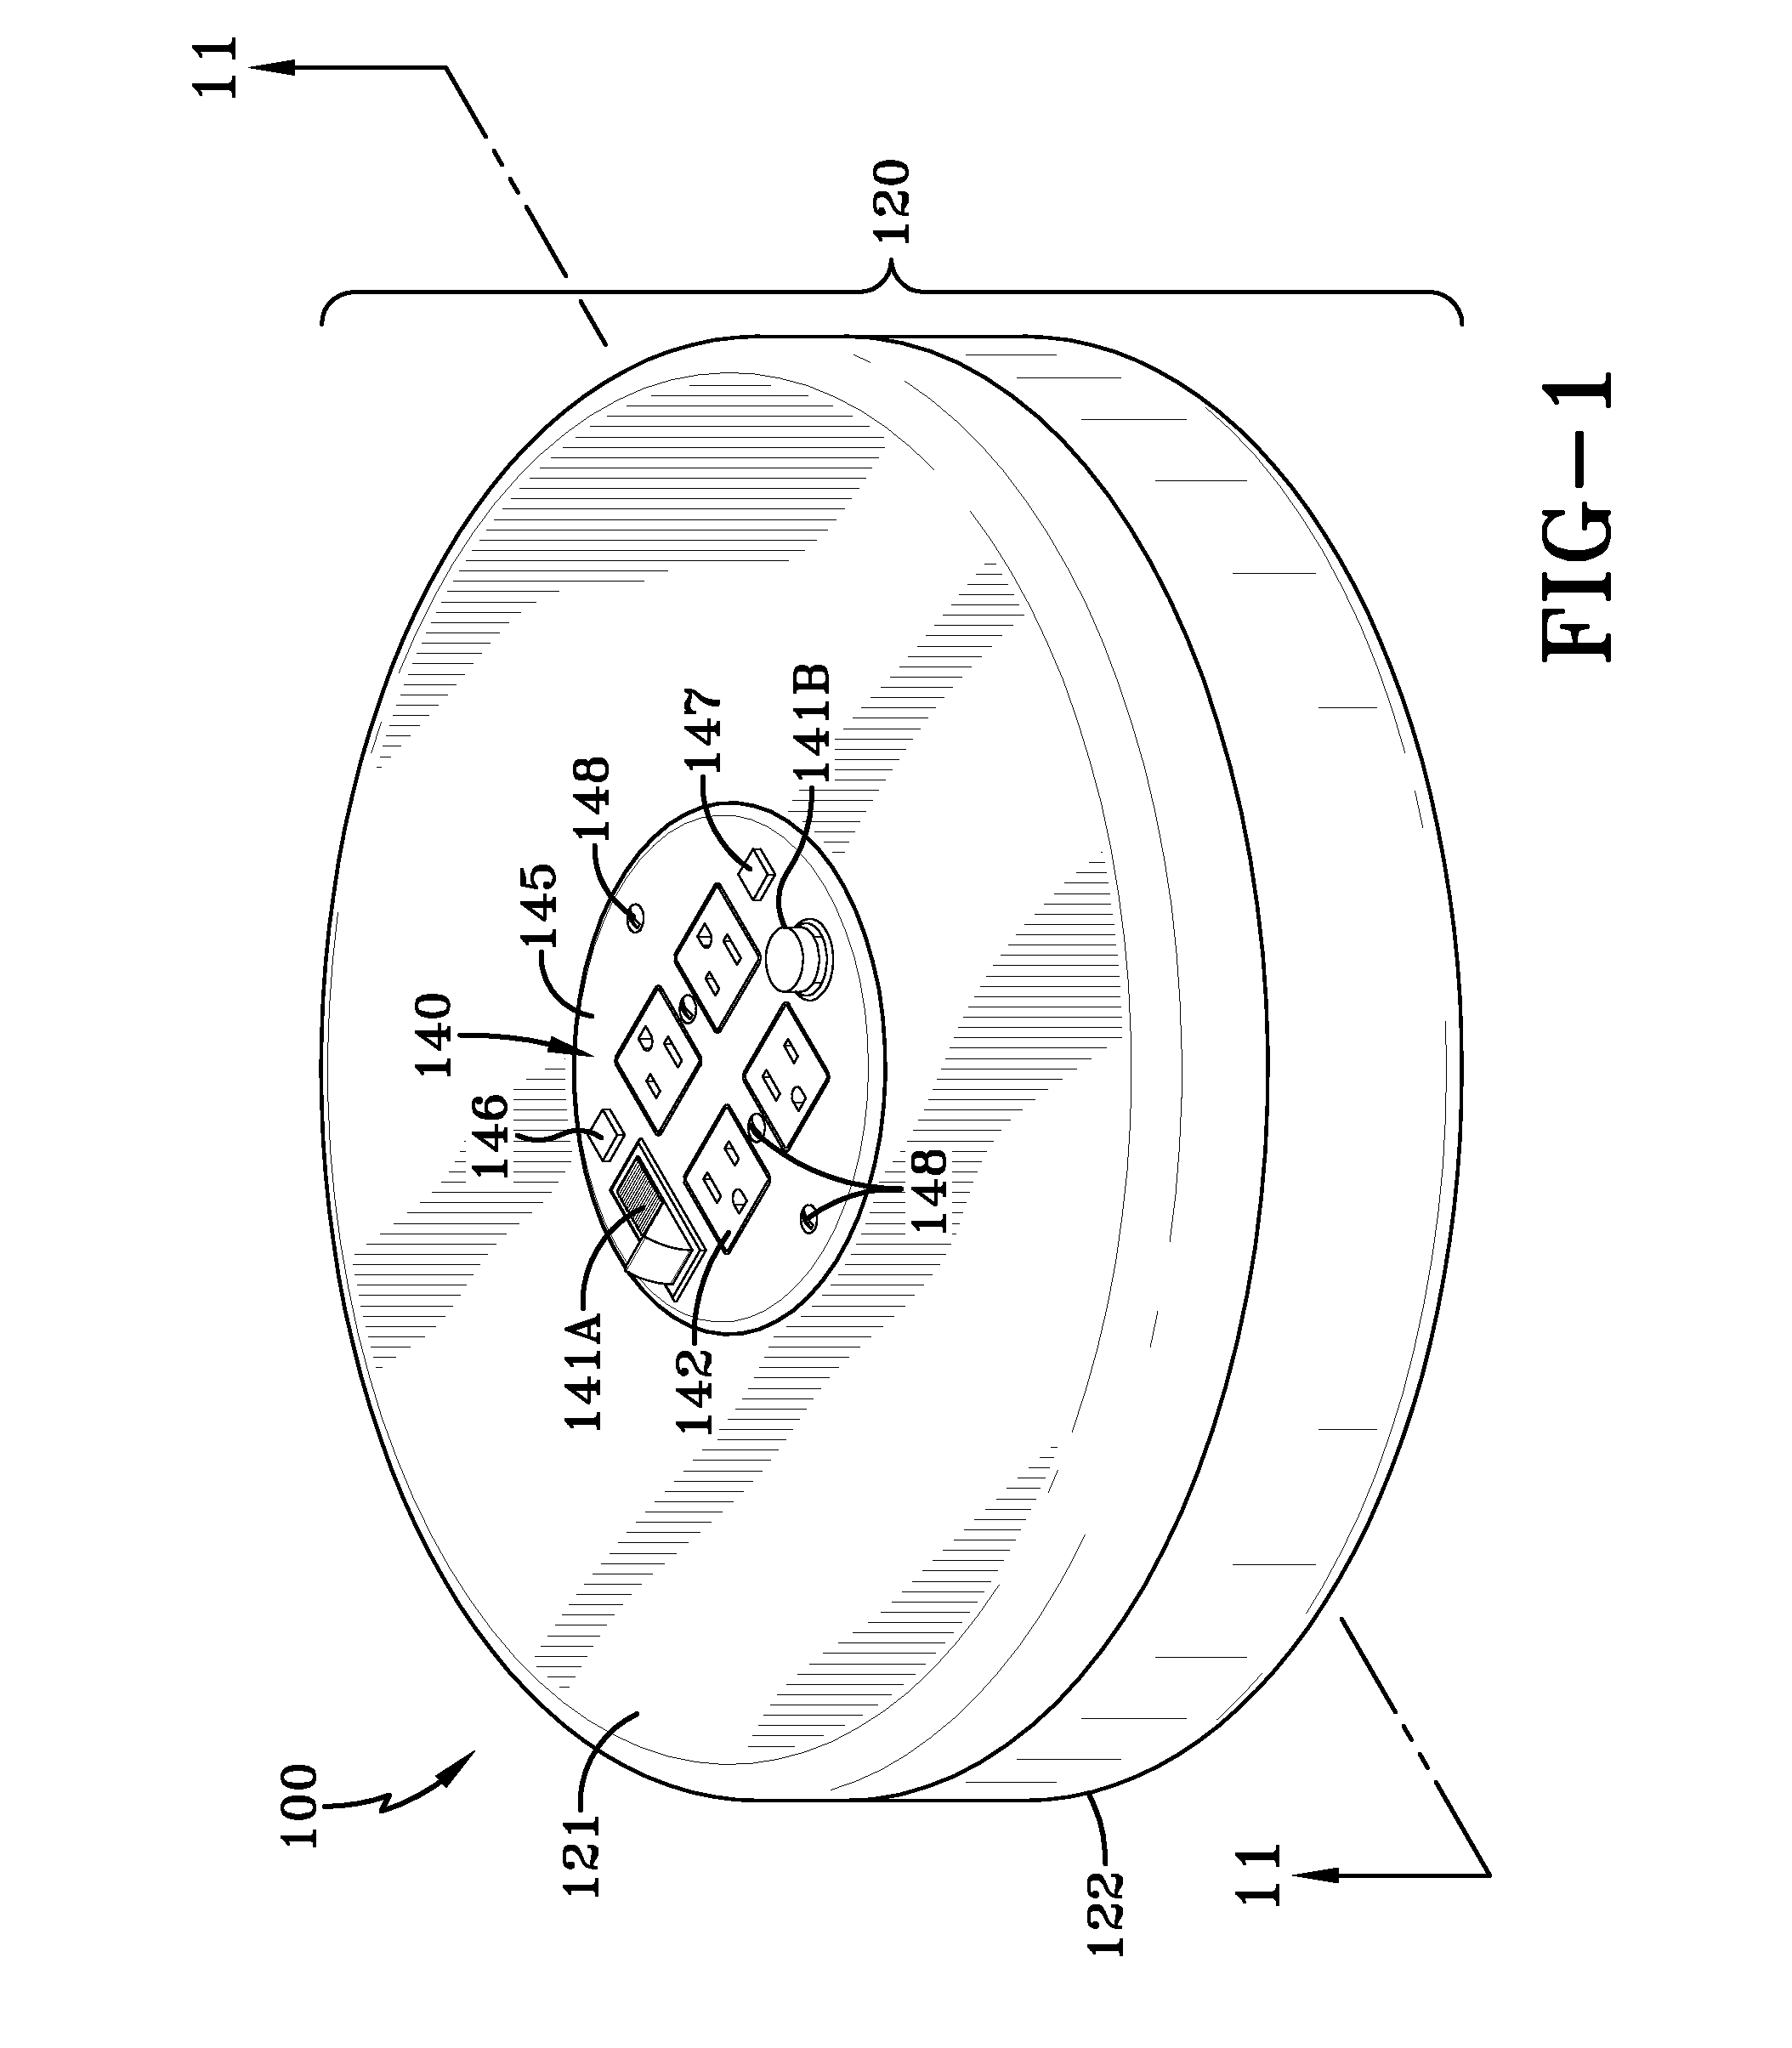 Gravity-assisted geomagnetic generator